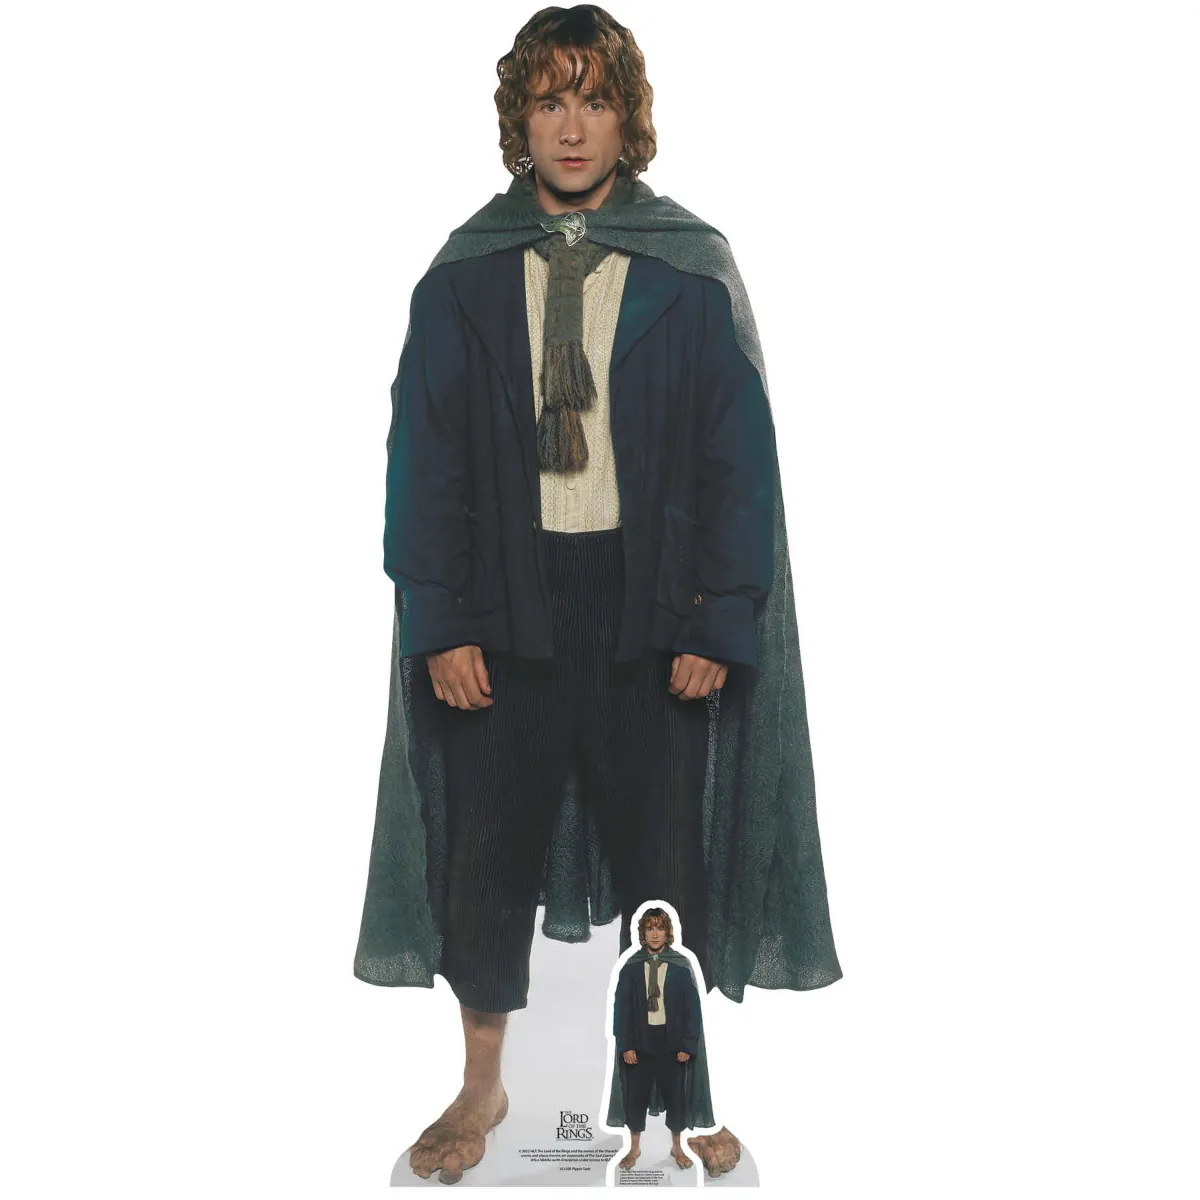 SC4200 Peregrin Took 'Pippin' (The Lord of the Rings) Lifesize + Mini Cardboard Cutout Standee Front